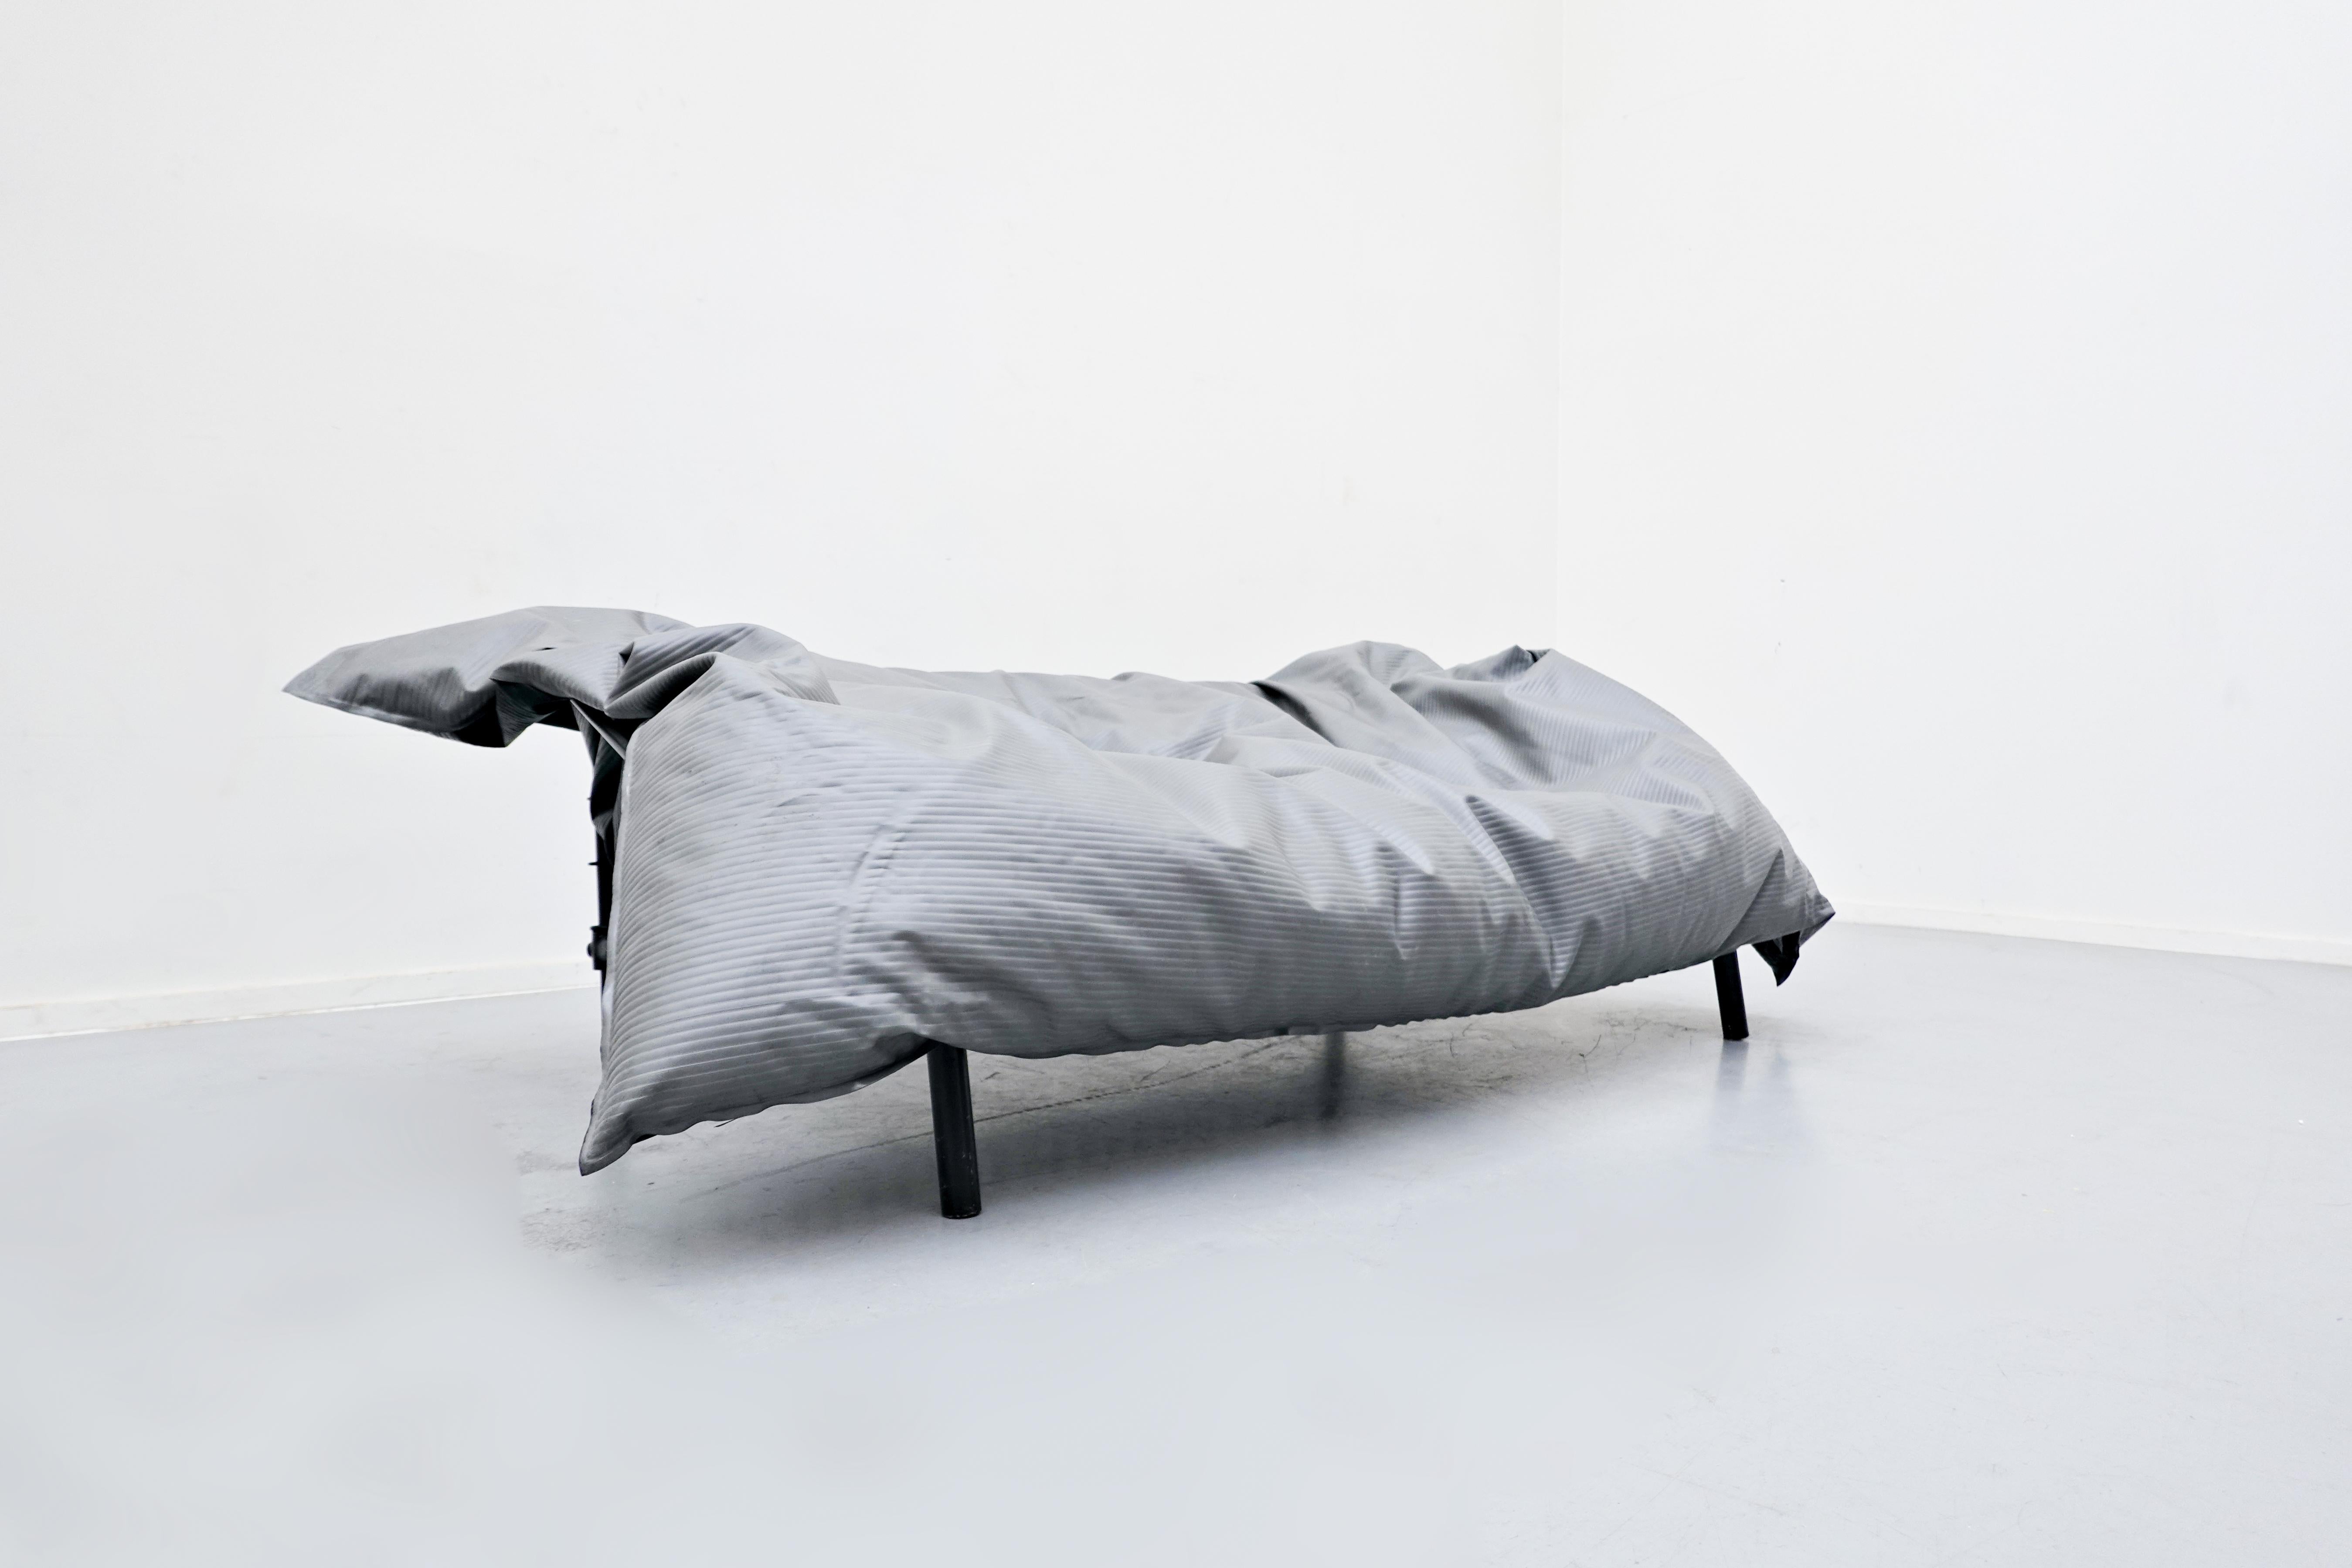 Rare sofa designed by Ron Arad for One/Off, United Kingdom, 1985

Steel structure and PVC seating cushion filled with unexpanded polystyrene granules.

